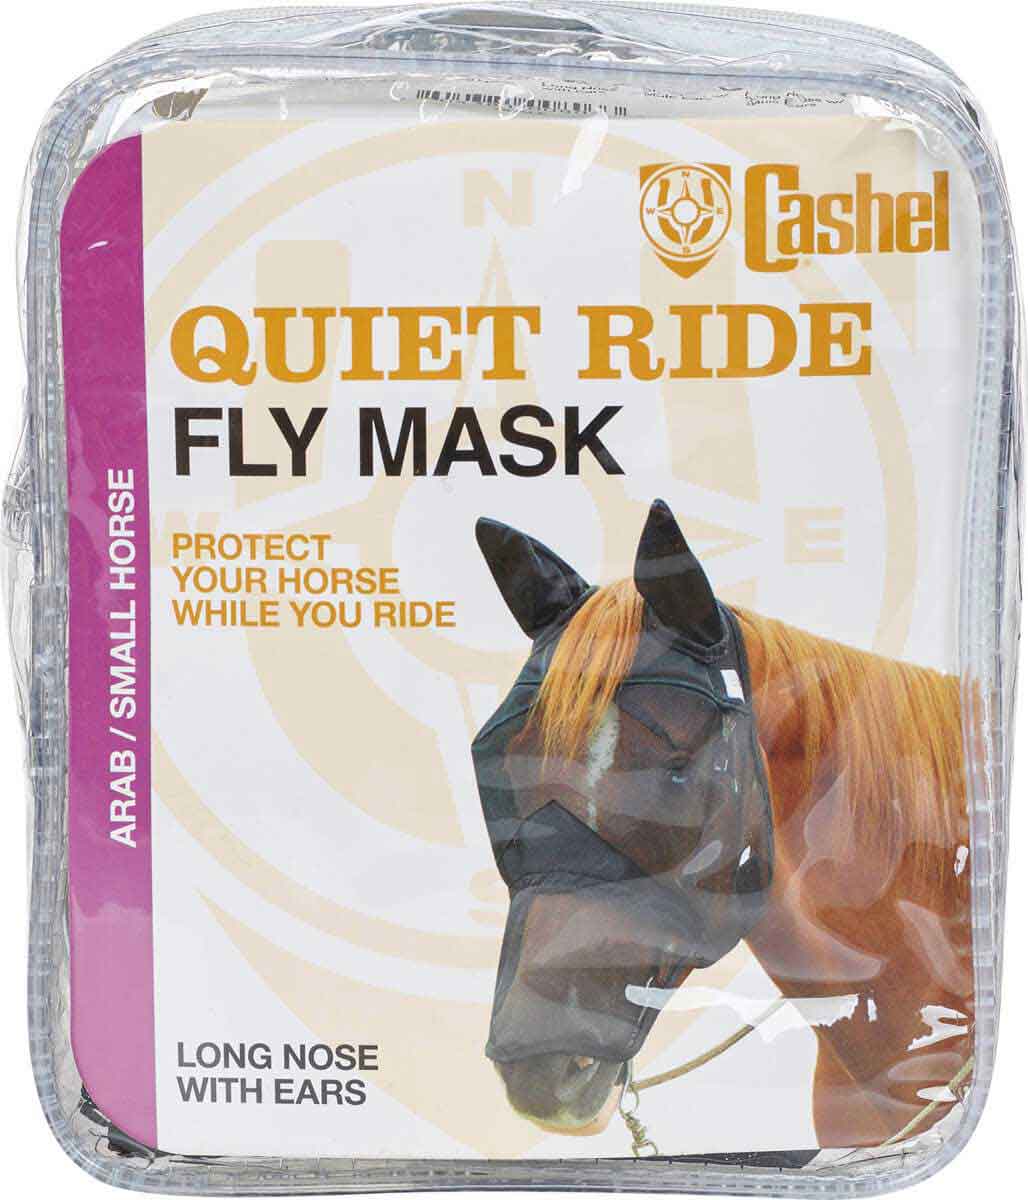 Details about   CASHEL FLY MASK STANDARD HORSE QUIET RIDE LONG COVERS NOSE EARS RIDING FOR TRAIL 